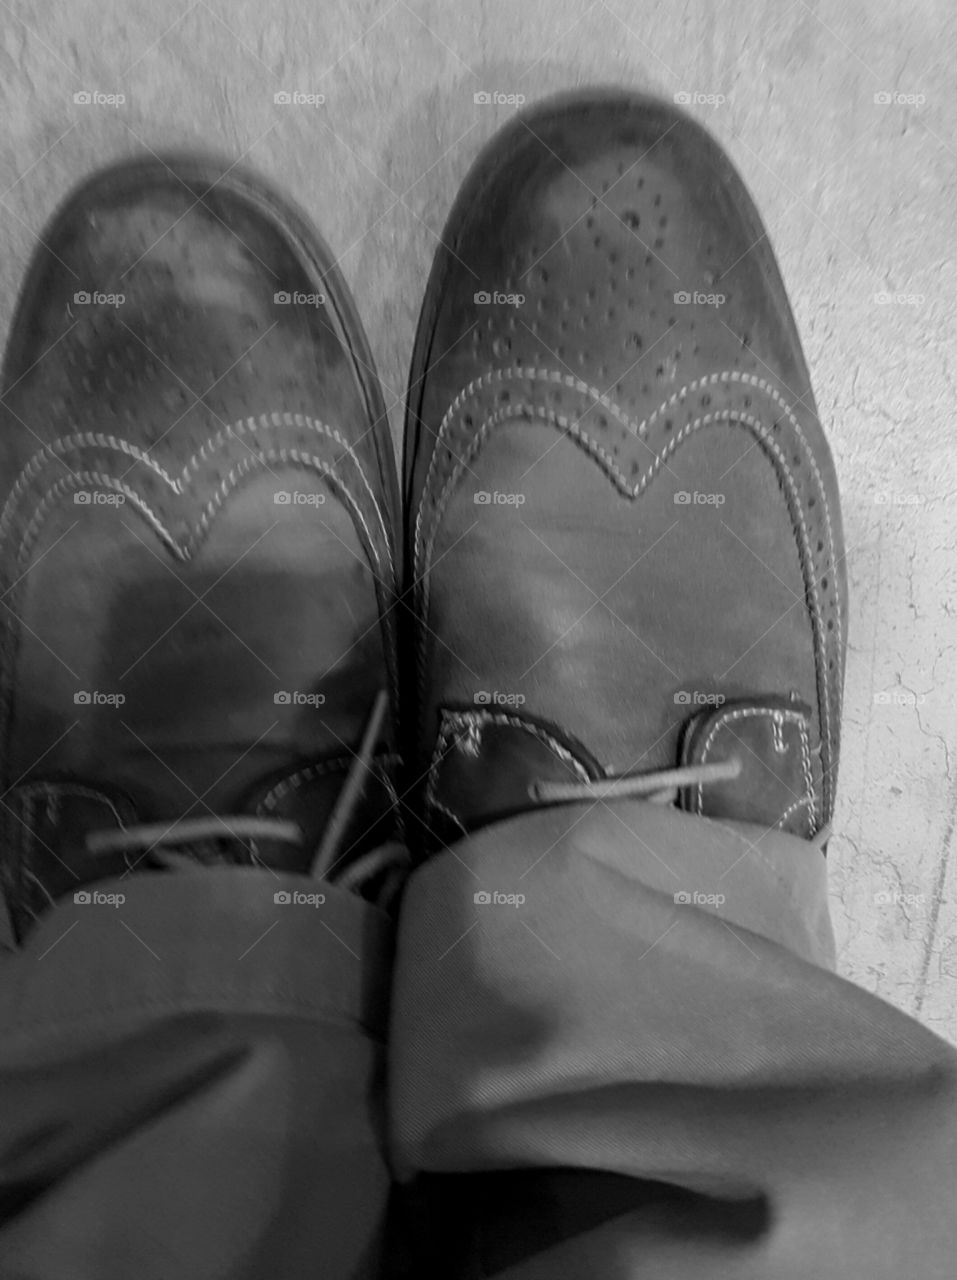 wing Tip shoes